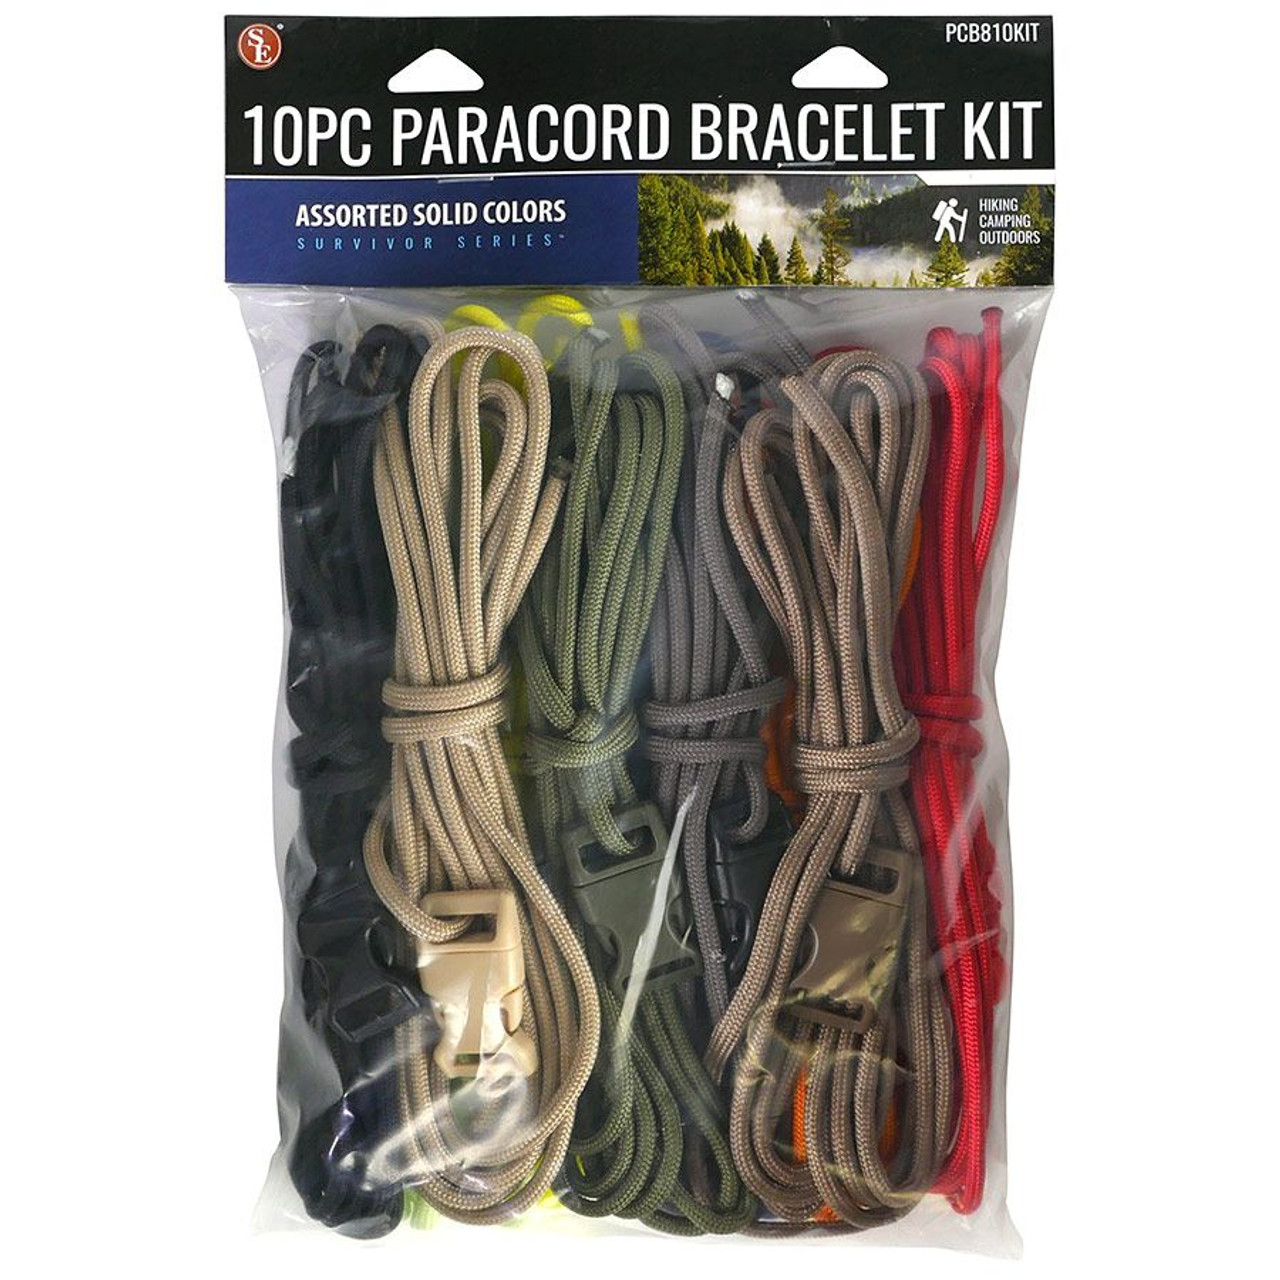 10 Piece Paracord Bracelet Kit - Assorted Colors - Camping Tools Supplies